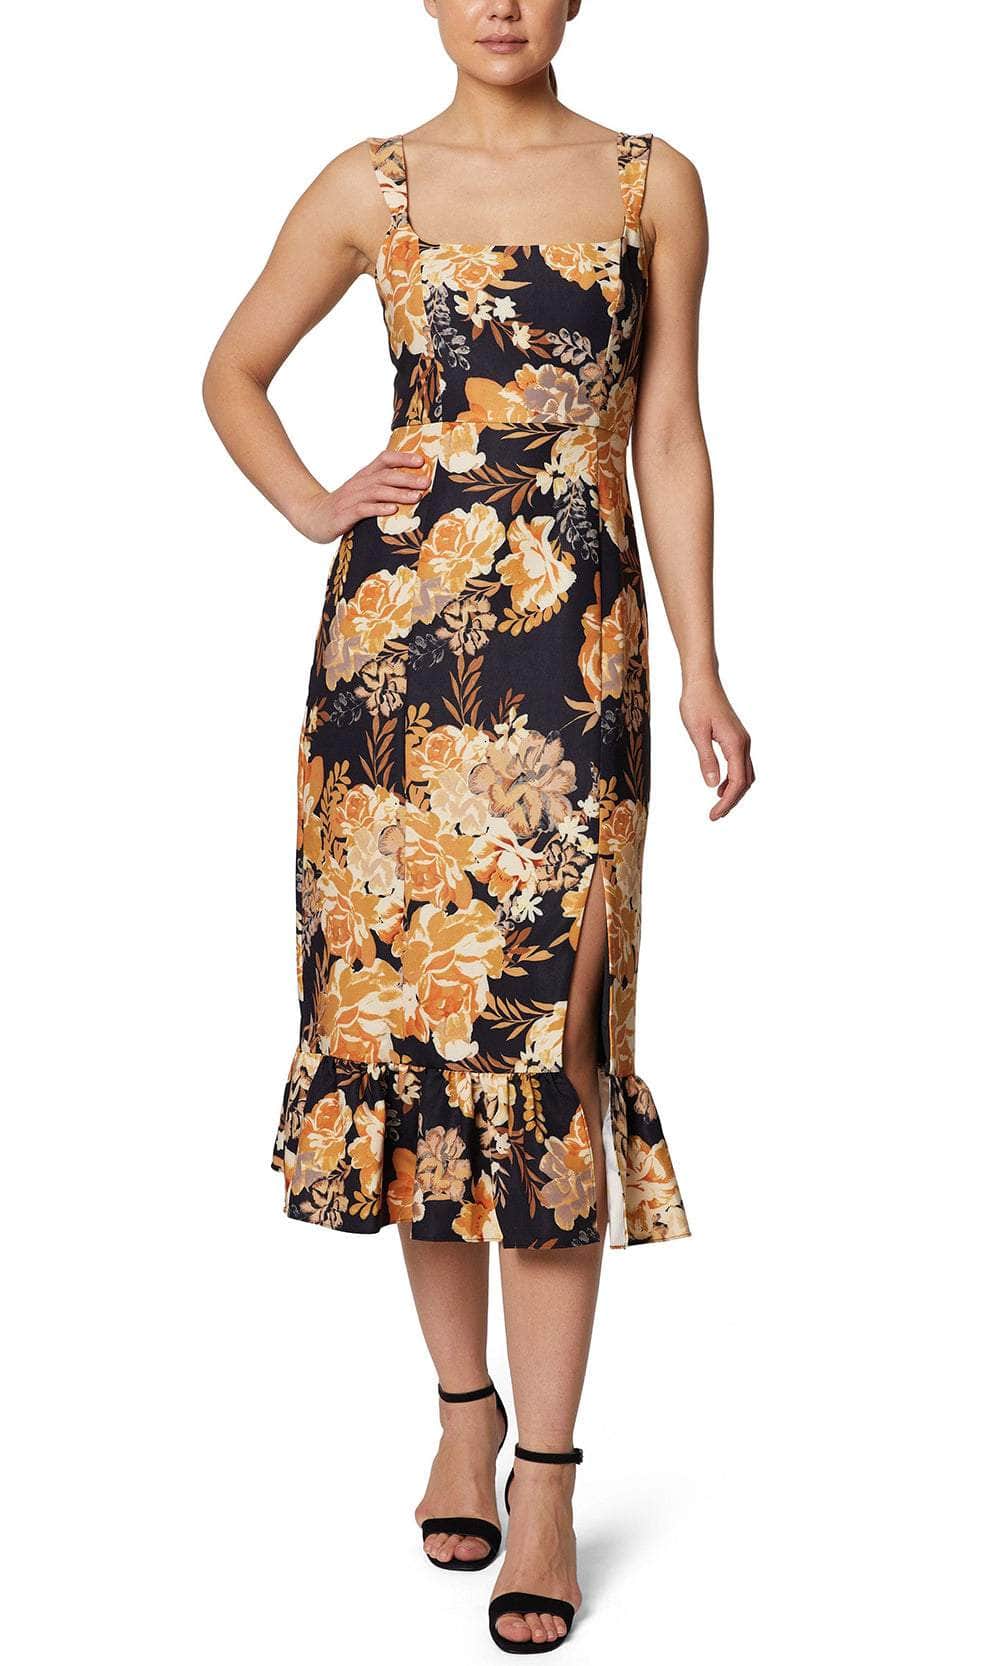 Image of Laundry HU07D18 - Sleeveless Floral Casual Dress